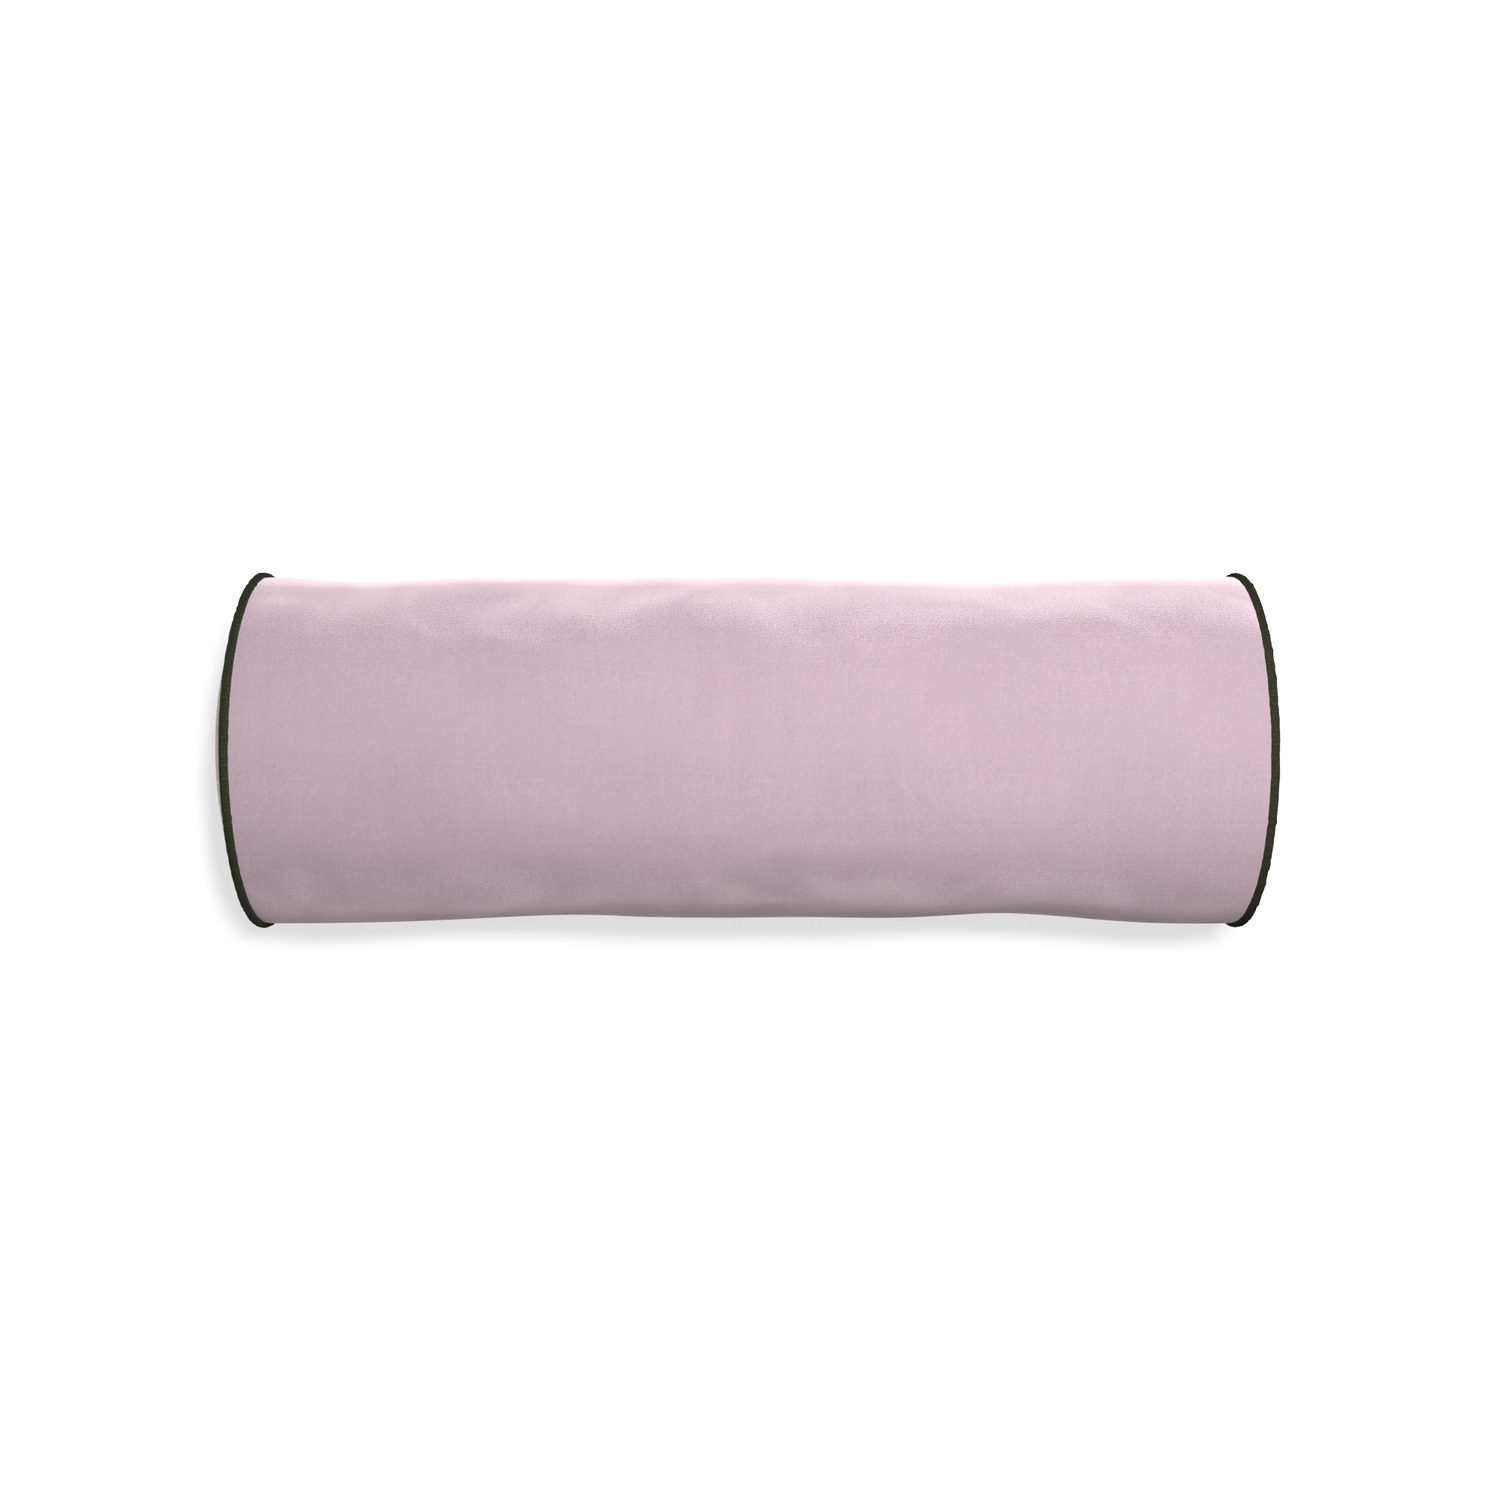 bolster lilac velvet pillow with fern green piping